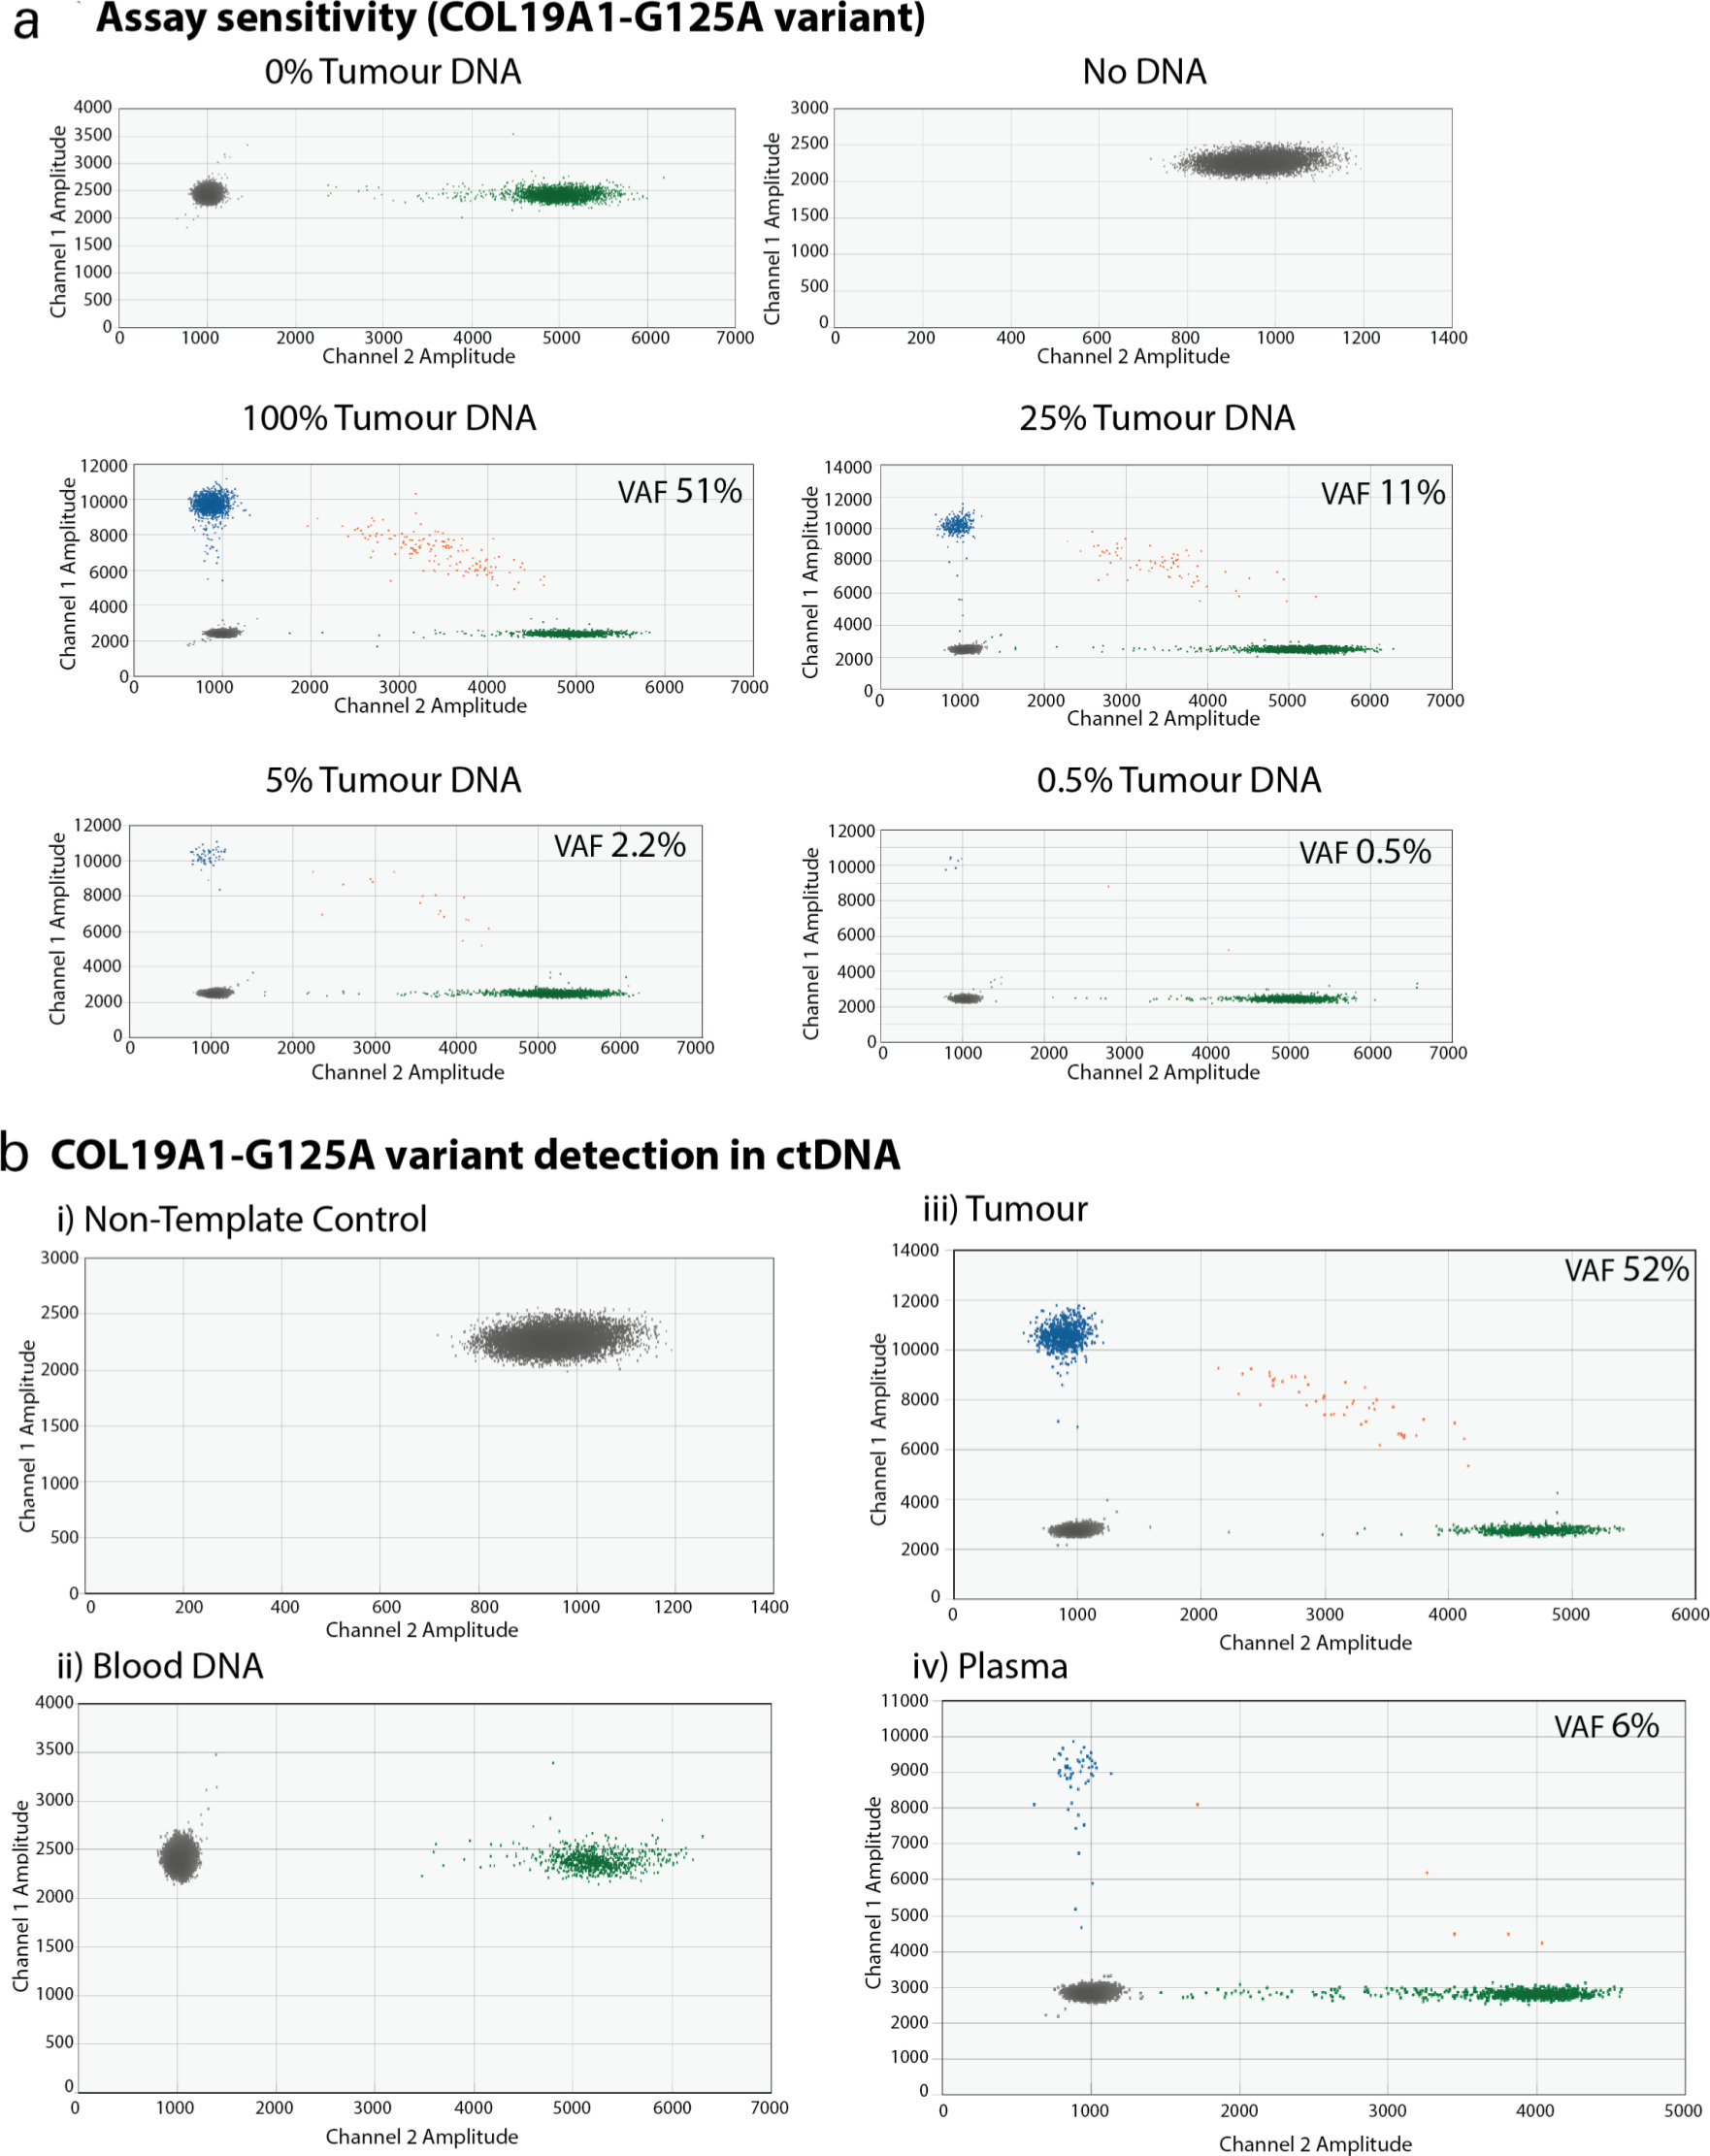 Fig. 3 
            Detection of tumour-specific alterations in sarcoma. Results for a representative case of localized extremity undifferentiated pleomorphic sarcoma. Whole exome sequencing of the primary tumour revealed a COL19A1-G125A variant. a) Results of a dilutional assay, demonstrating our ability to detect this tumour-specific variant at 0.5% of the wild type genome with droplet polymerase chain reaction (ddPCR). b) Results demonstrating that the COL19A1-G125A variant was detectable in the patient’s plasma. Shown are ddPCR results for DNA extracted from the patient’s 1) a non-template control, 2) whole blood (i.e. wild-type; 20 ng DNA), 3) tumour (10 ng DNA), and 4) plasma (i.e. circulating tumour DNA; 10 ng DNA). Green = wild-type-positive droplets; blue = variant-positive droplets; orange = variant/wild-type positive droplets; grey = negative droplets. VAF, variant allele frequency.
          